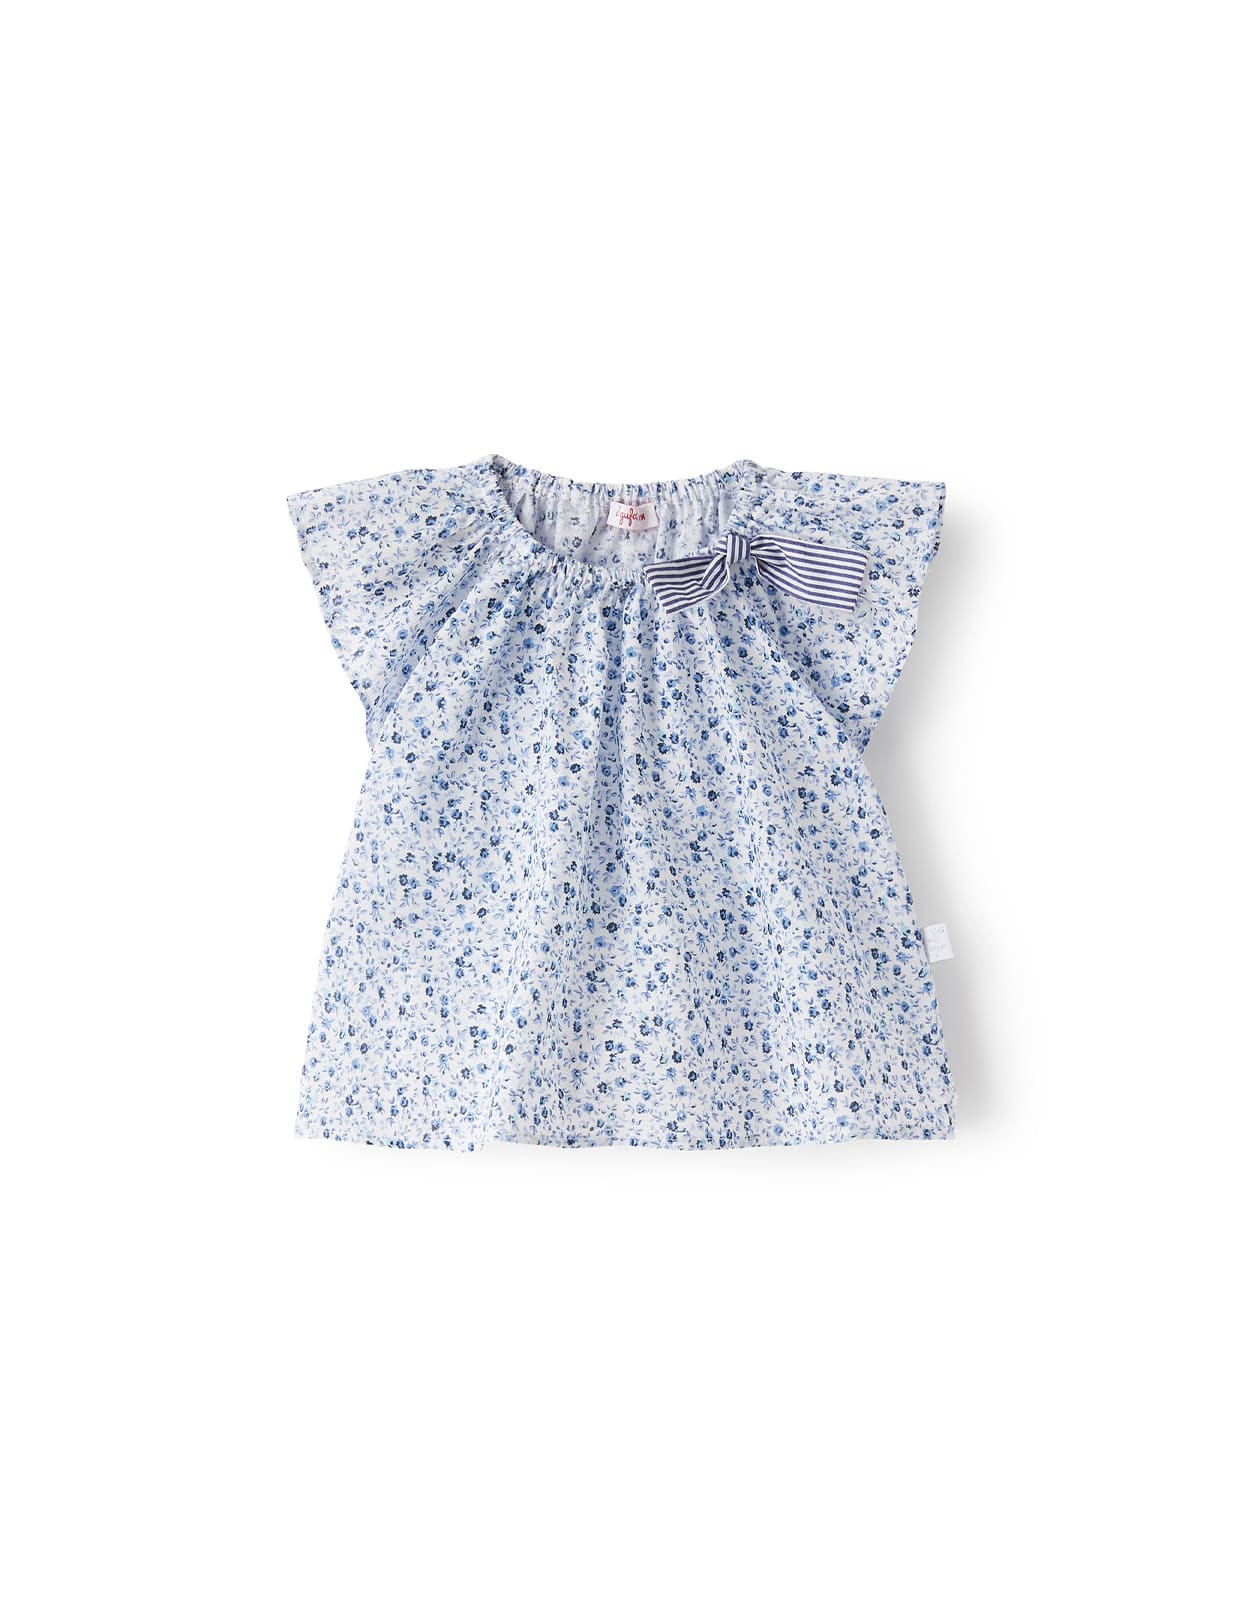 IL GUFO VOILE SHIRT WITH BLUE FLOWER PRINT